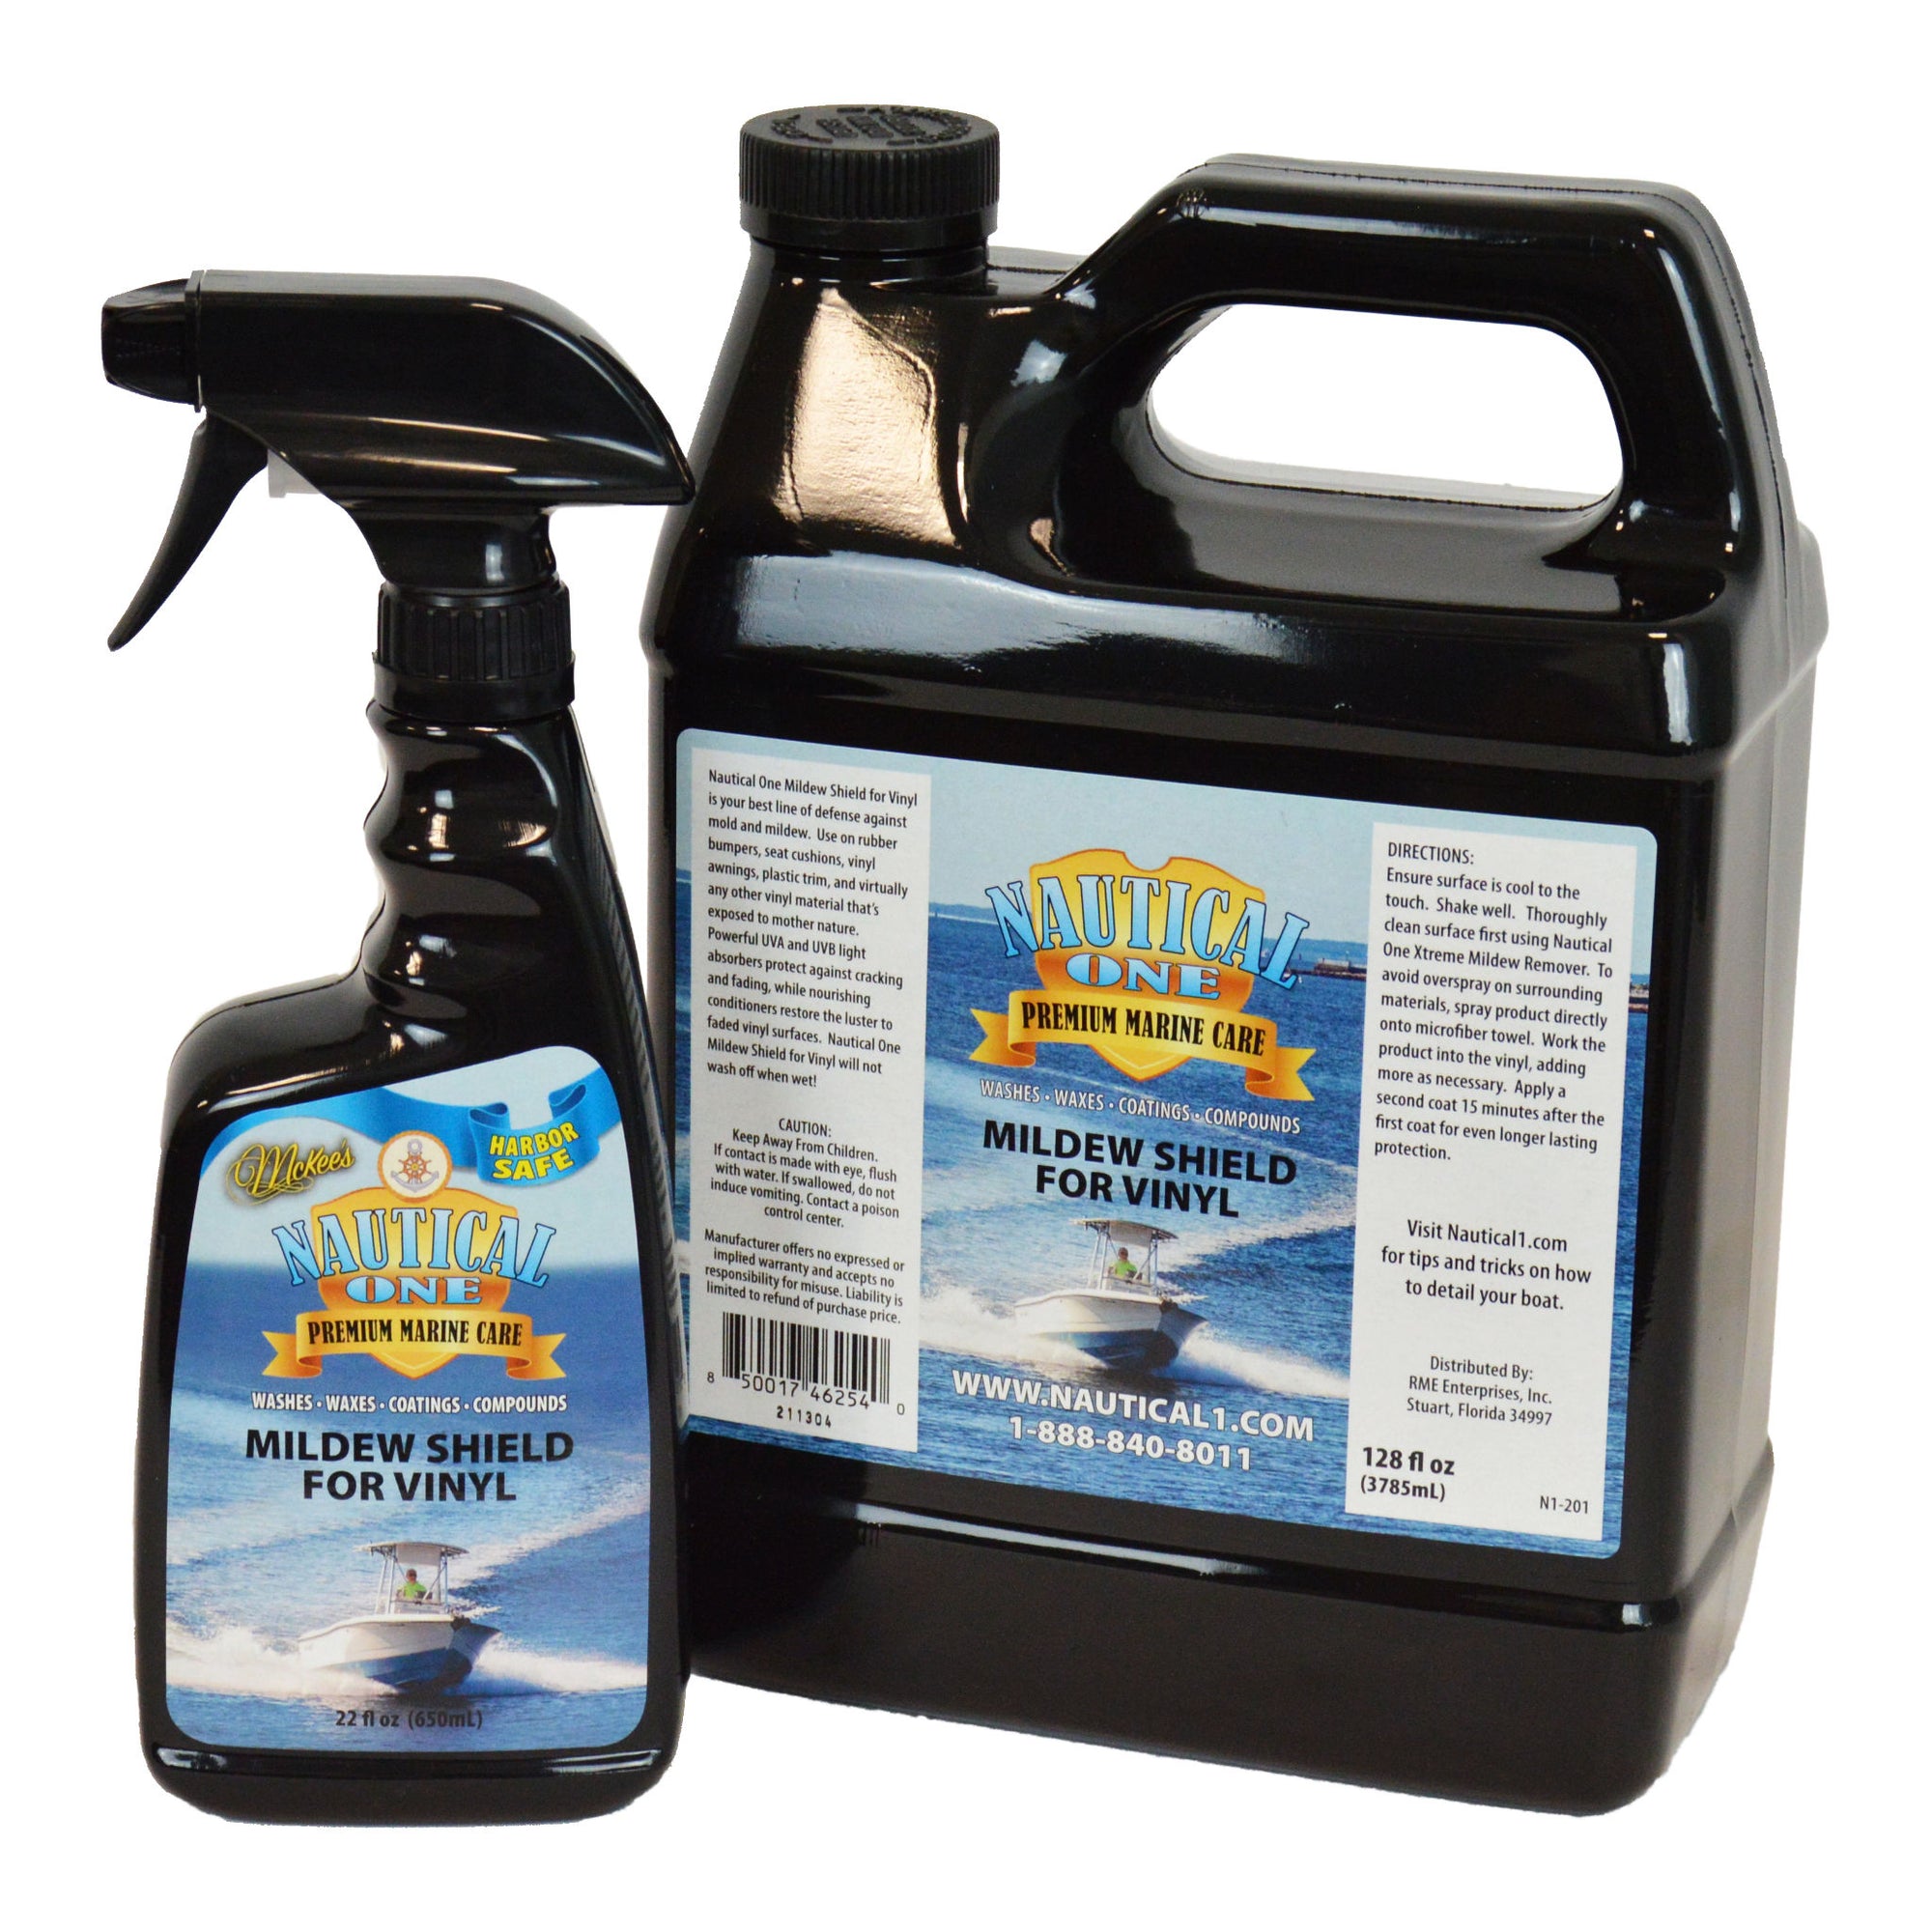 Marine Cleaning Products - Aquatech Marine Care Products - Product